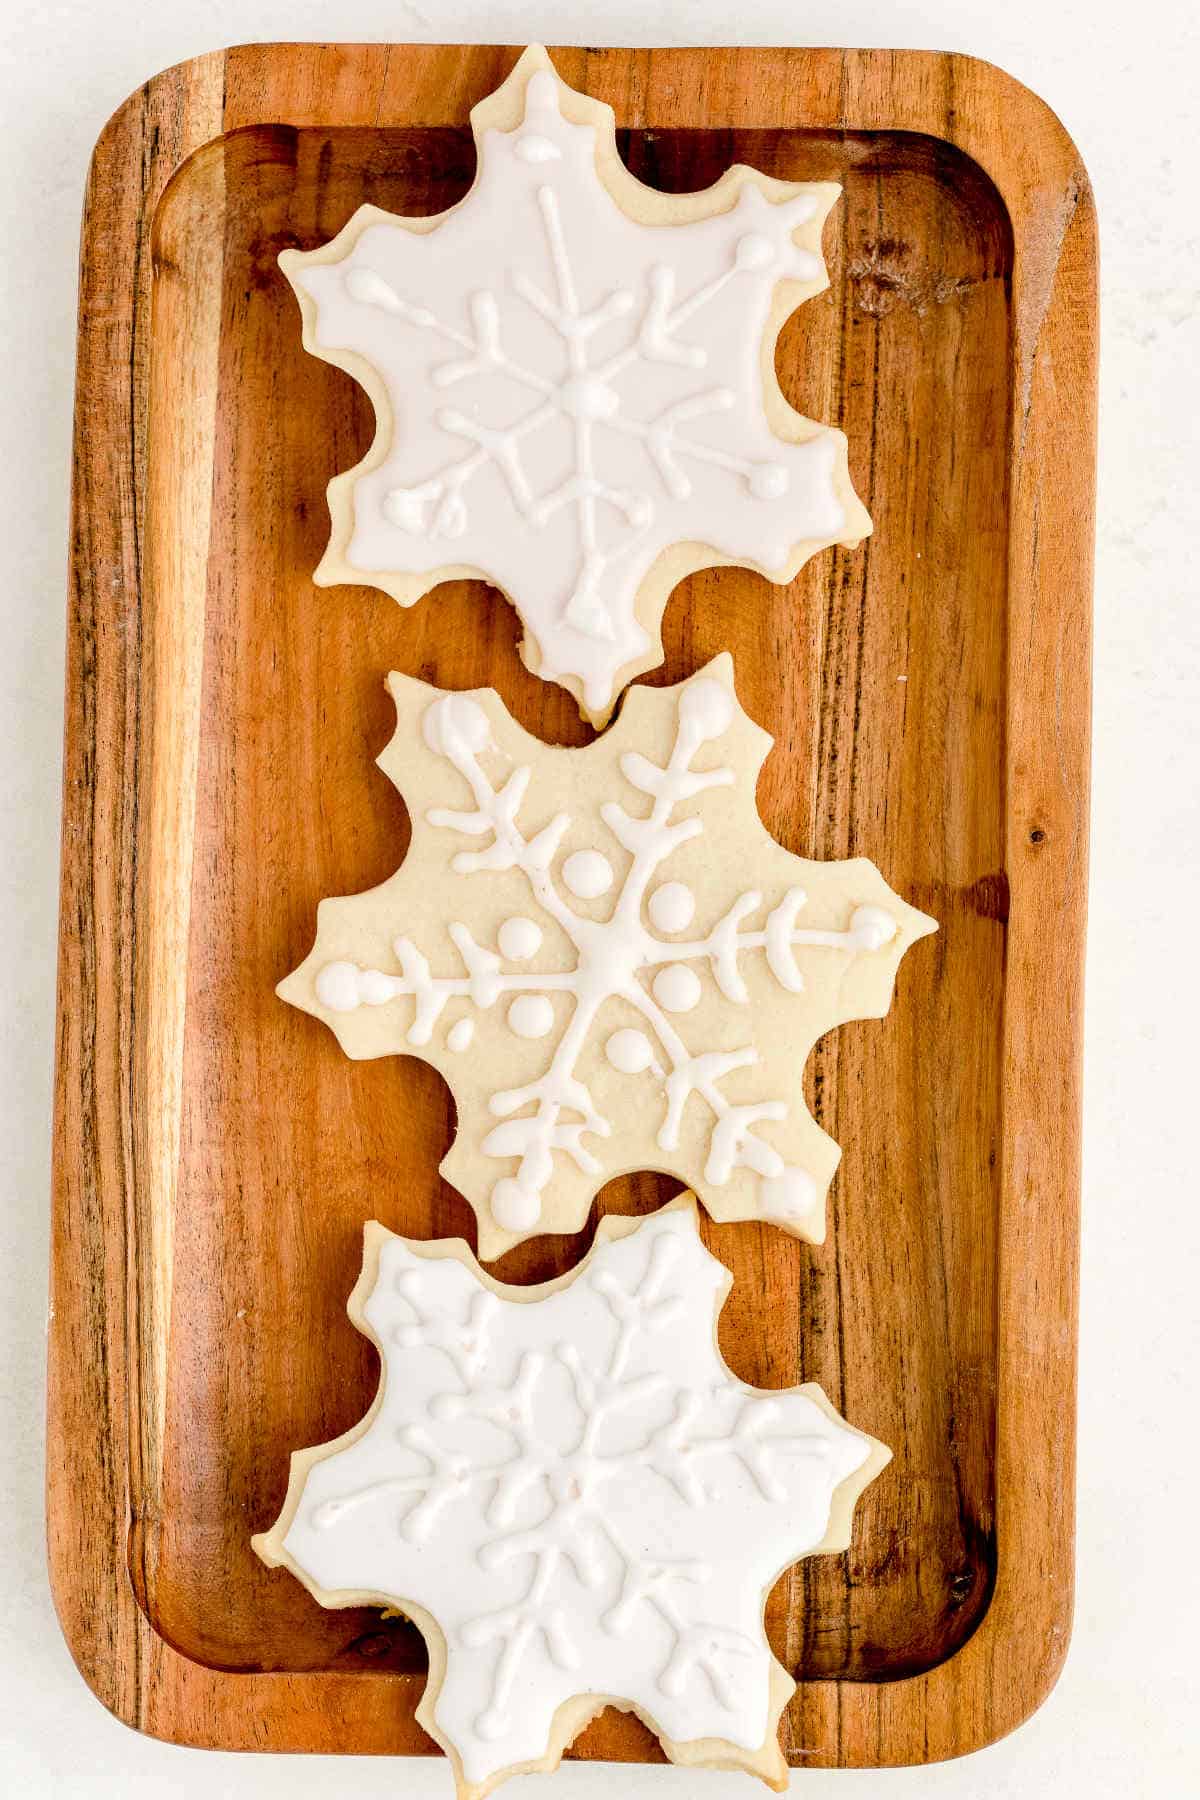 Snowflake-shaped sugar cookies on wooden plate decorated with eggless royal icing.